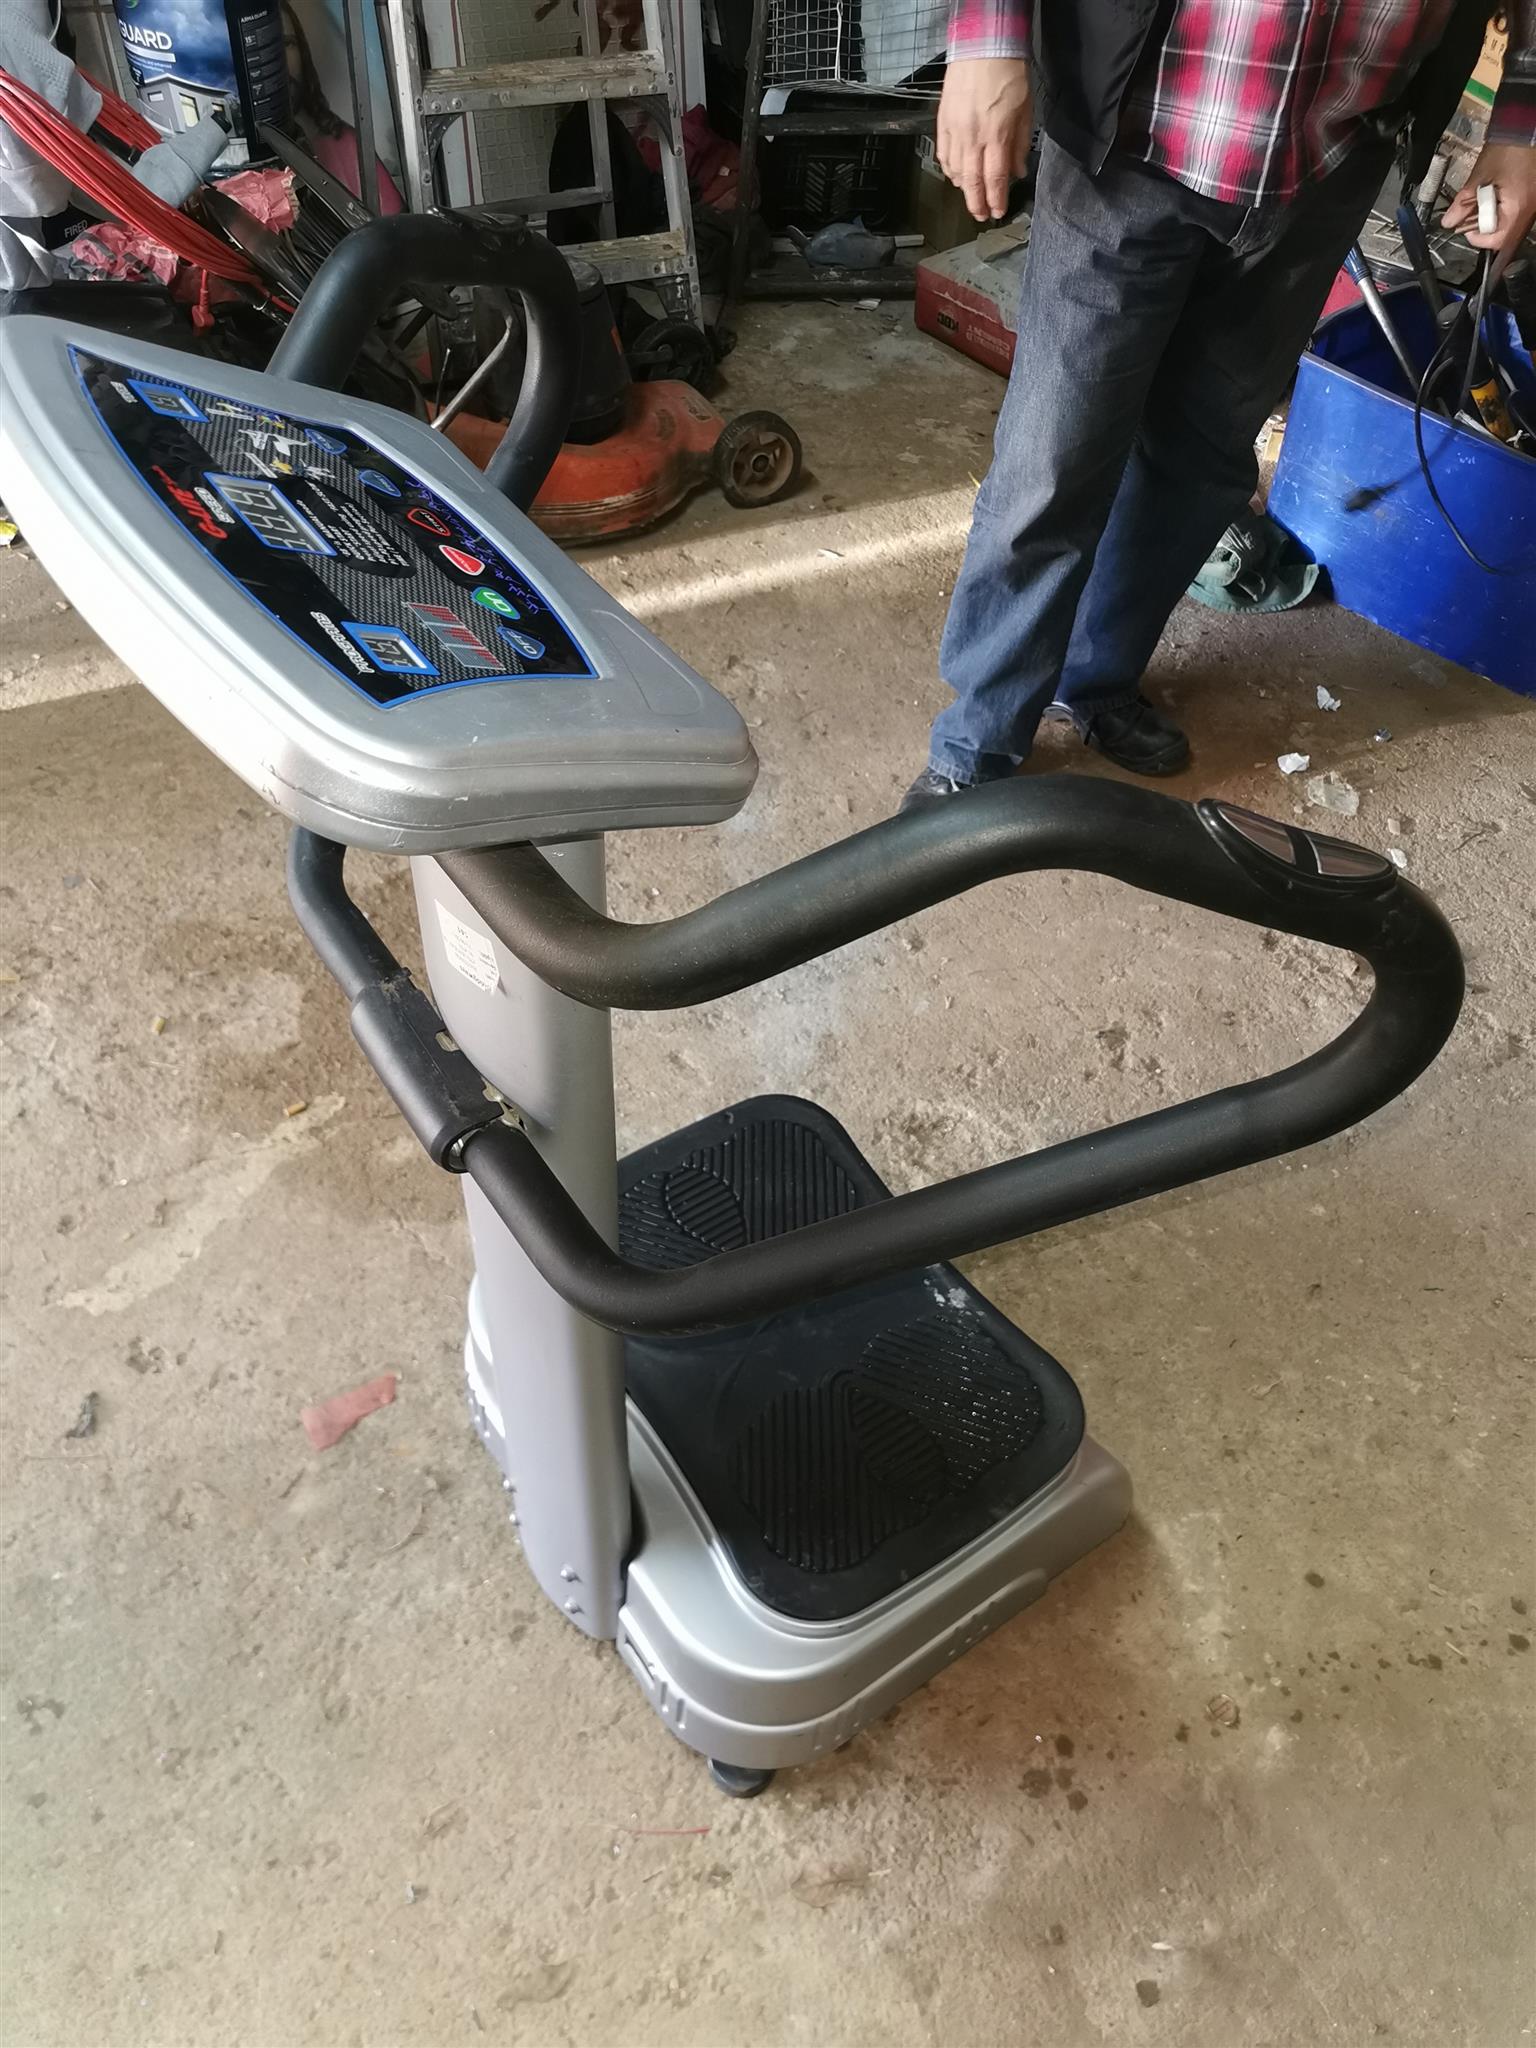 MUST GO!!! Crazy fit massage machine for sale in GREAT condition everything work